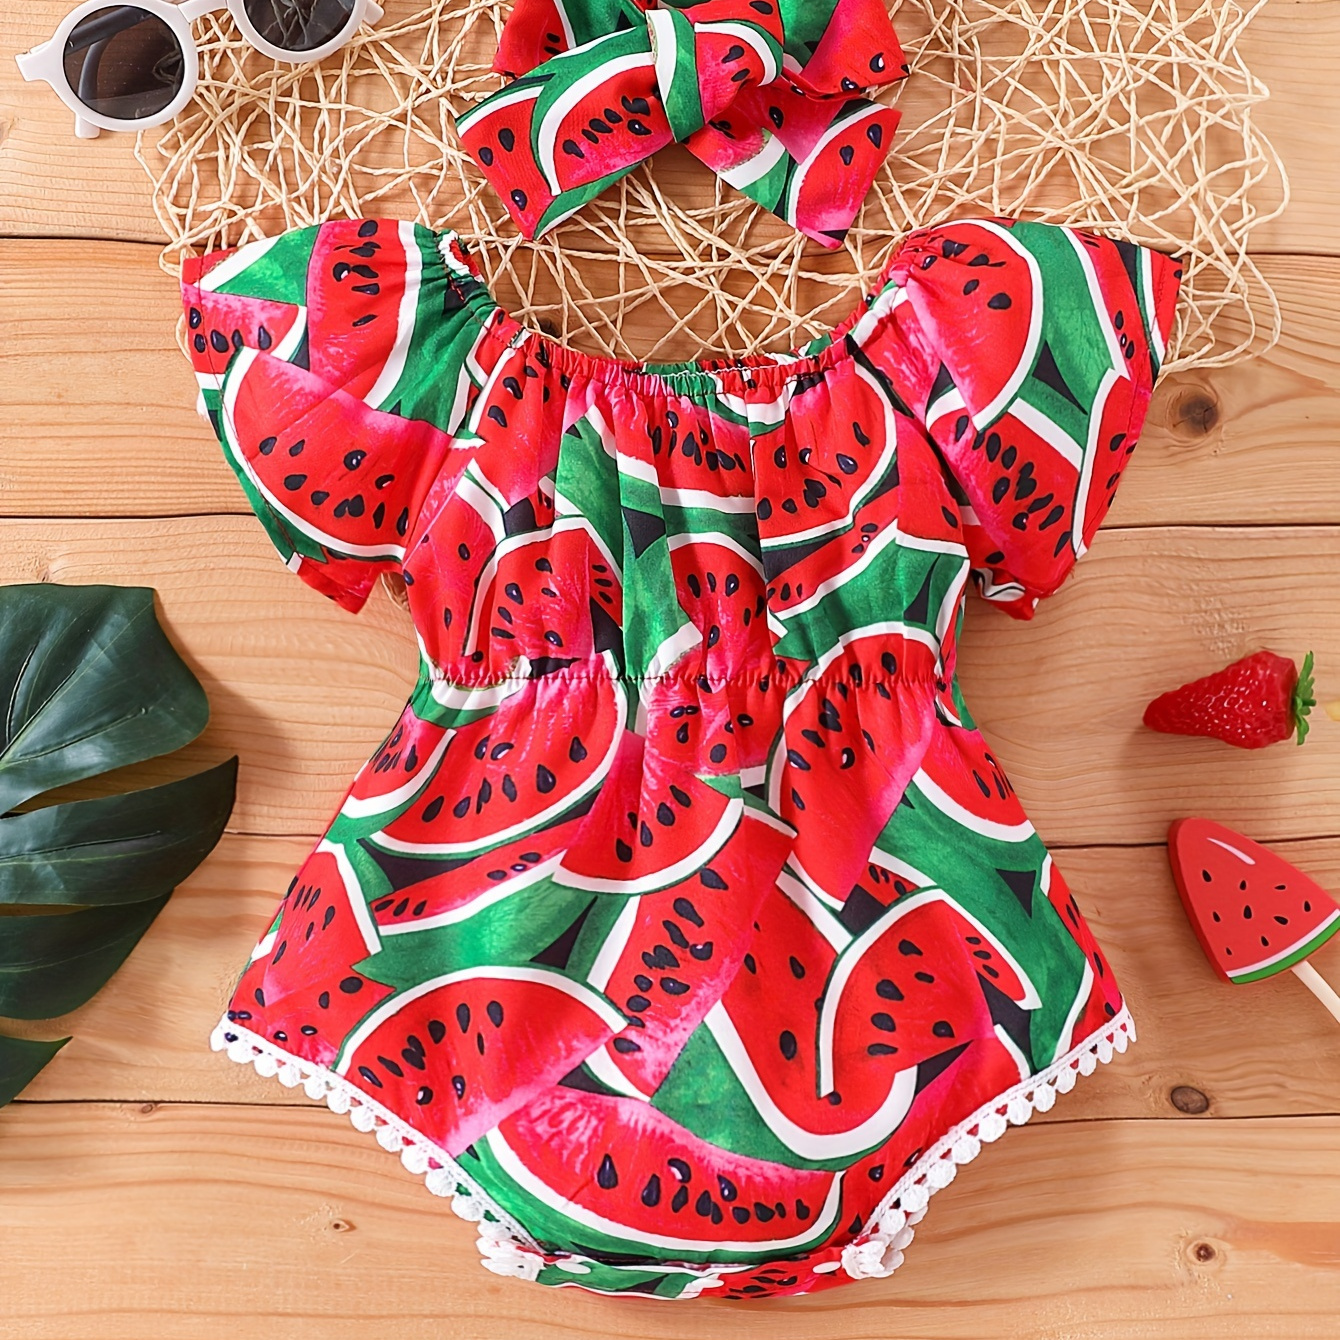 

Baby's Cartoon Watermelon Full Print Triangle Bodysuit & Headband, Casual Cap Sleeve Onesie, Toddler & Infant Girl's Clothing For Summer Holiday, As Gift